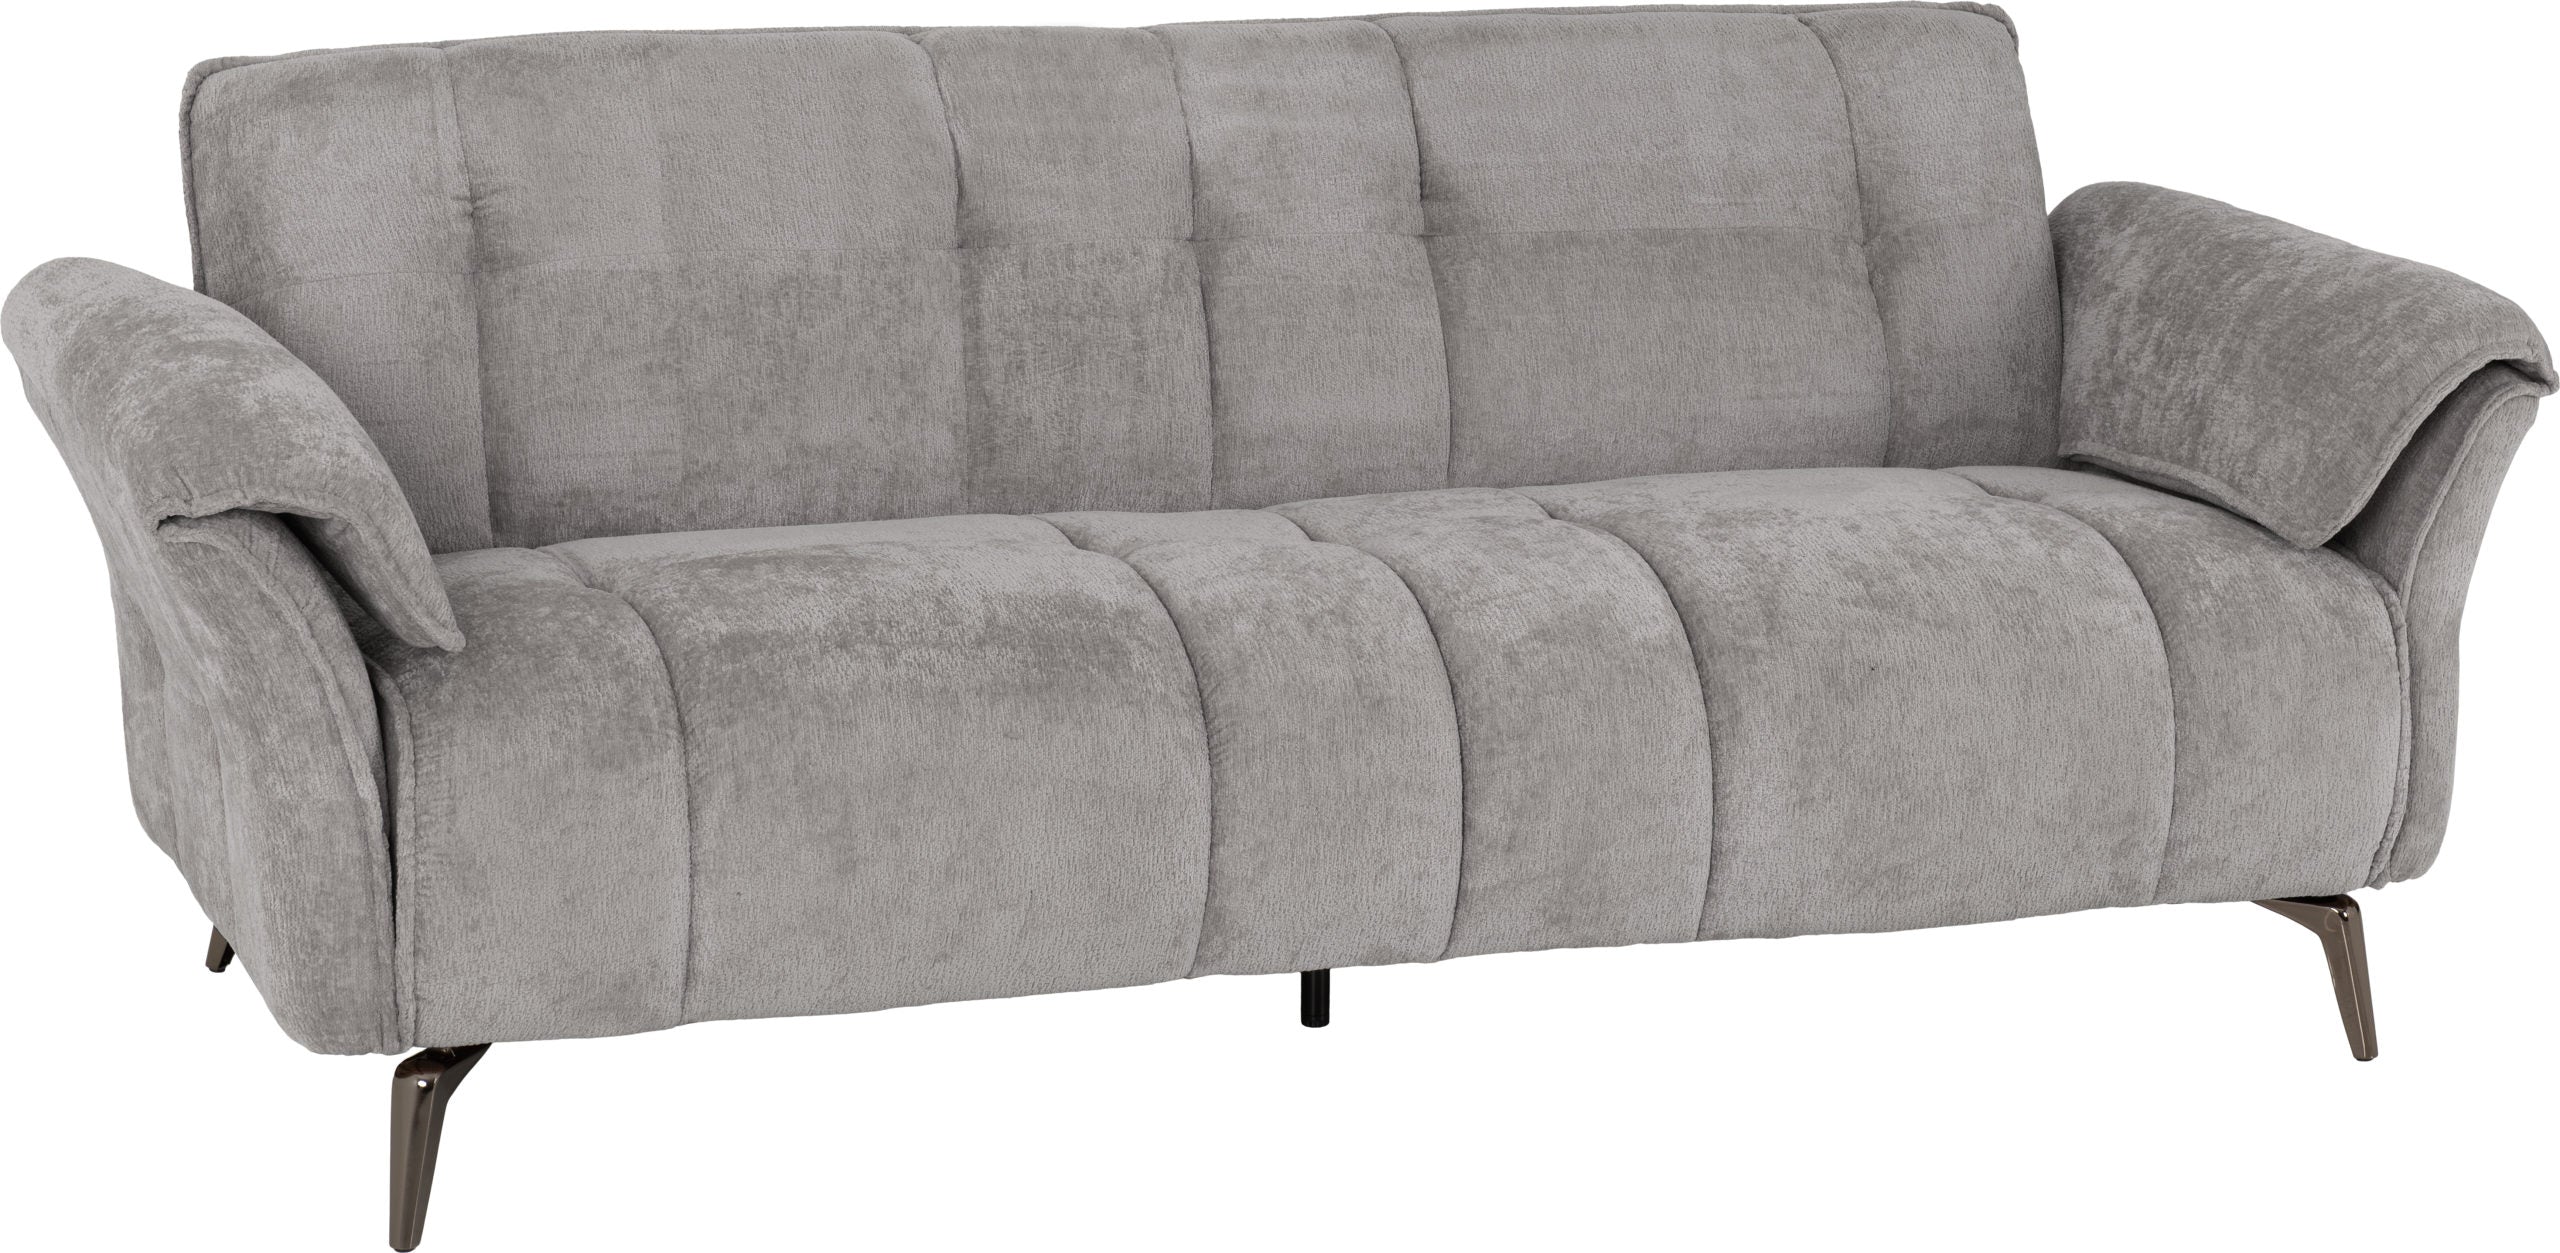 Amalfi 3 Seater Sofa in Grey Fabric with Metal Legs 2 Man Delivery